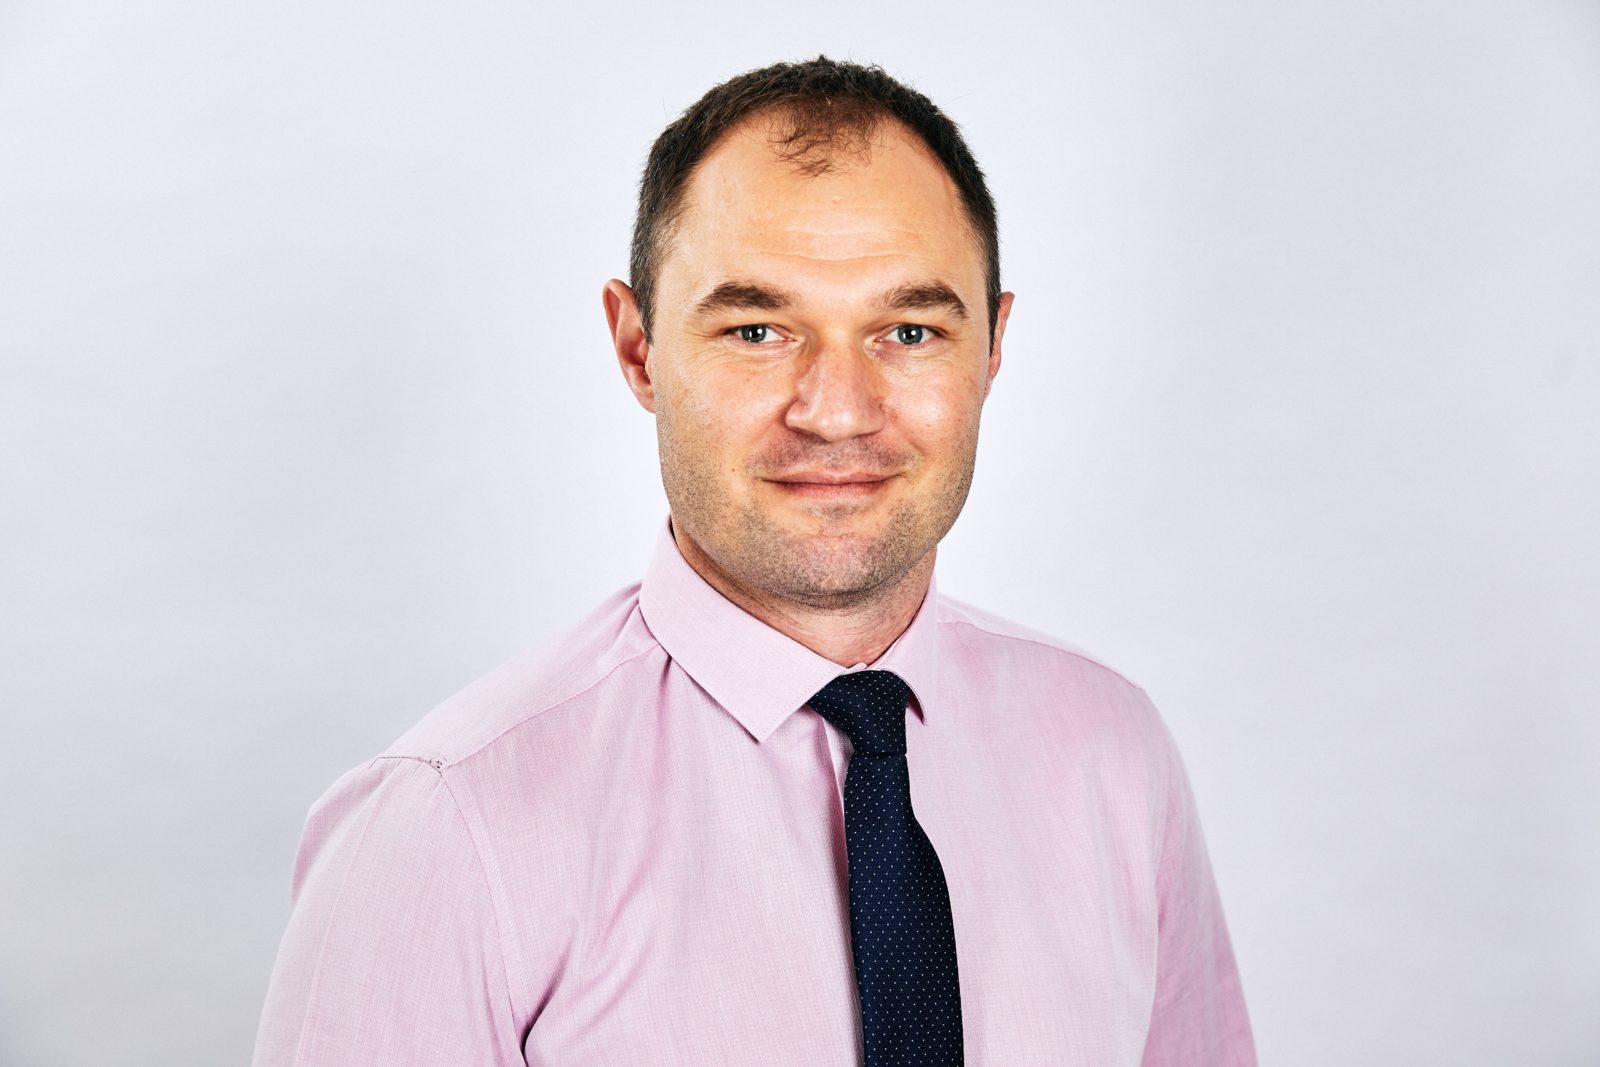 Photo of Ryan Firth - pkb.co.uk